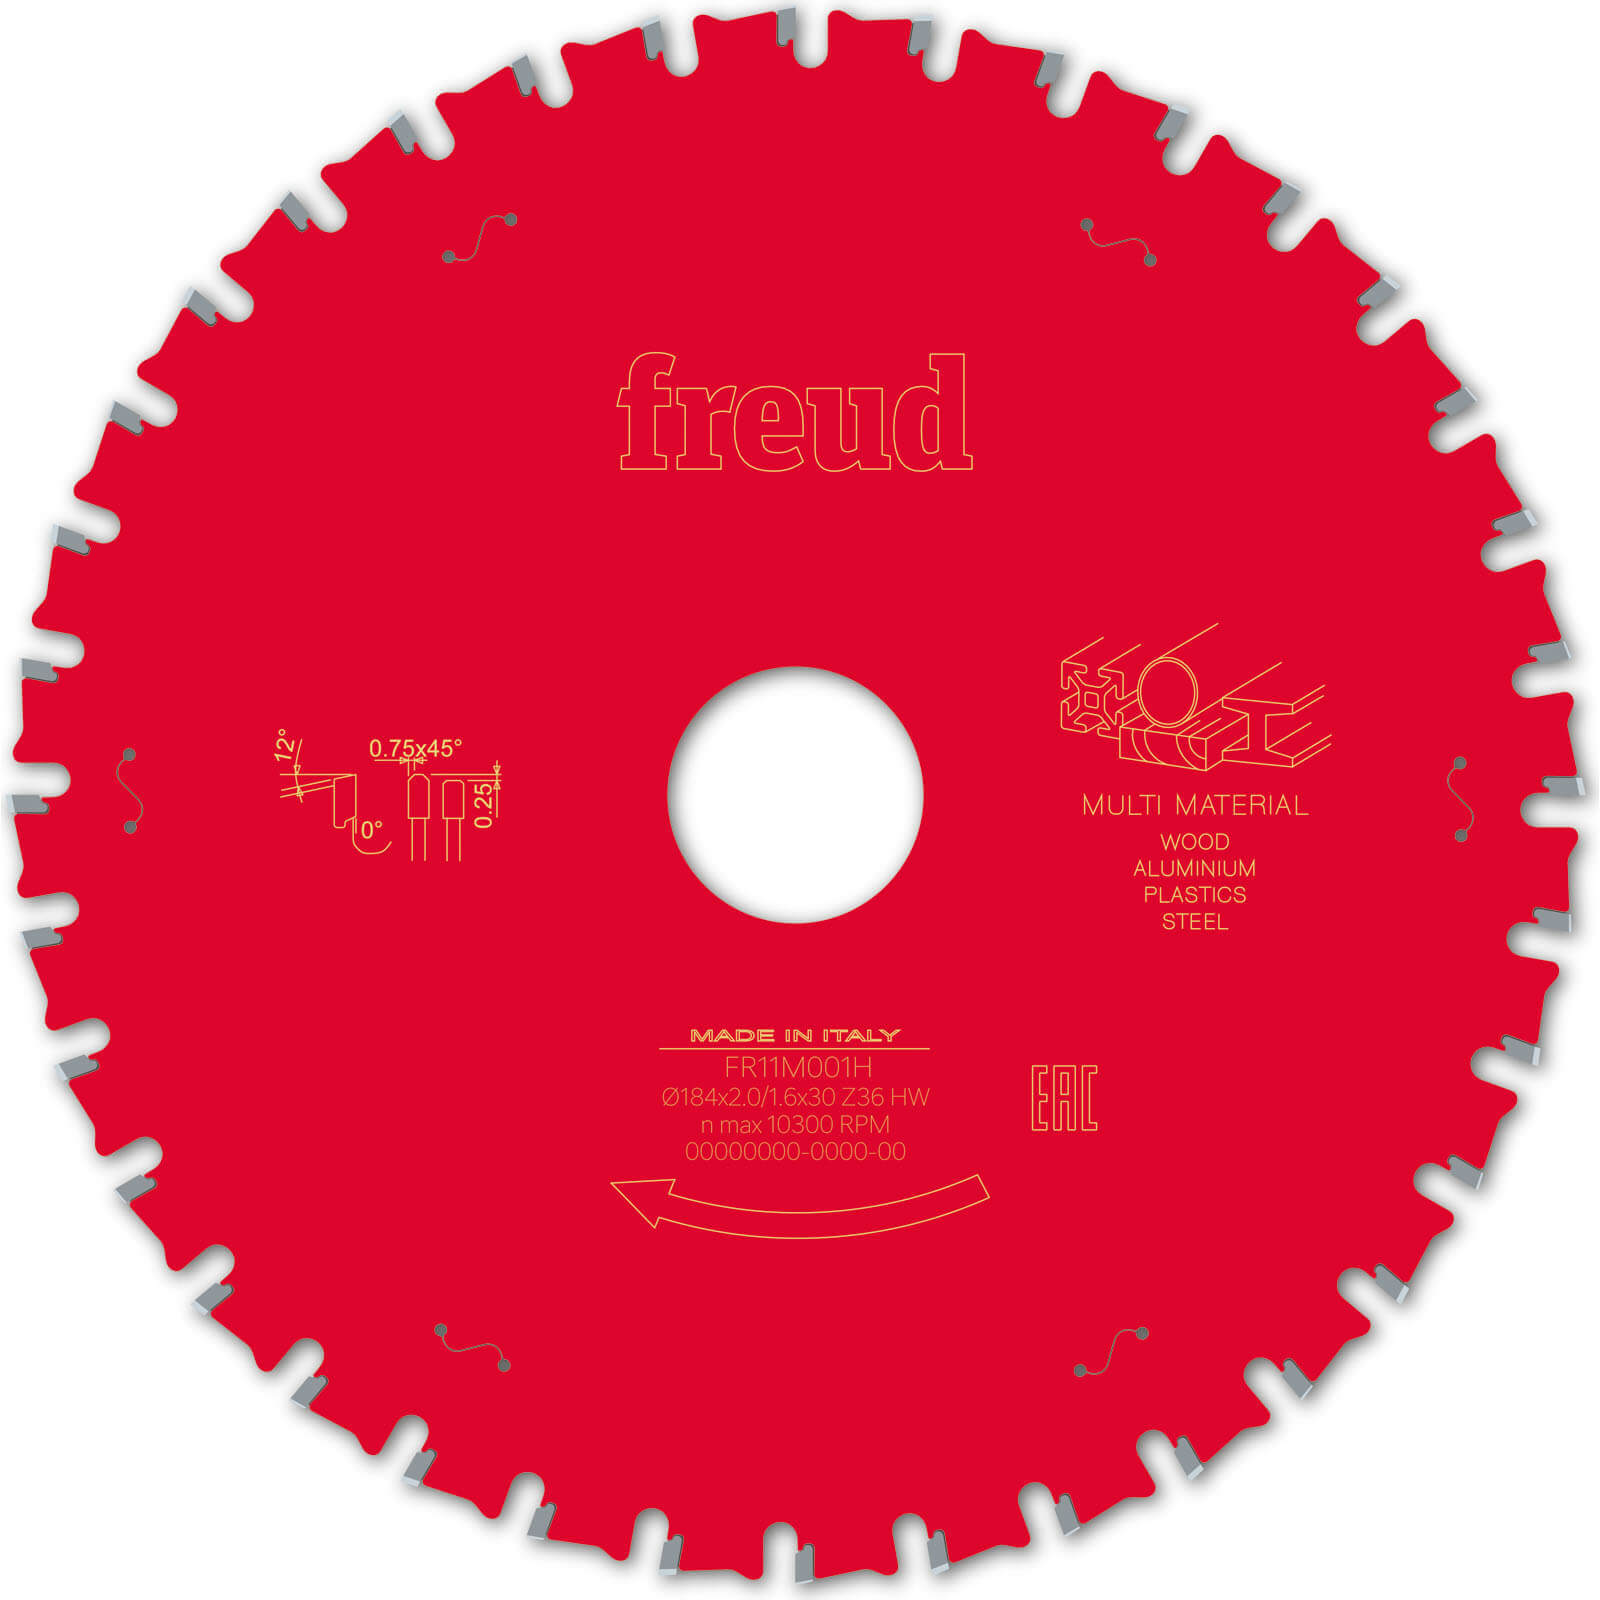 Photo of Freud Lp91m Multi Material Cutting Circular And Mitre Saw Blade 184mm 38t 30mm